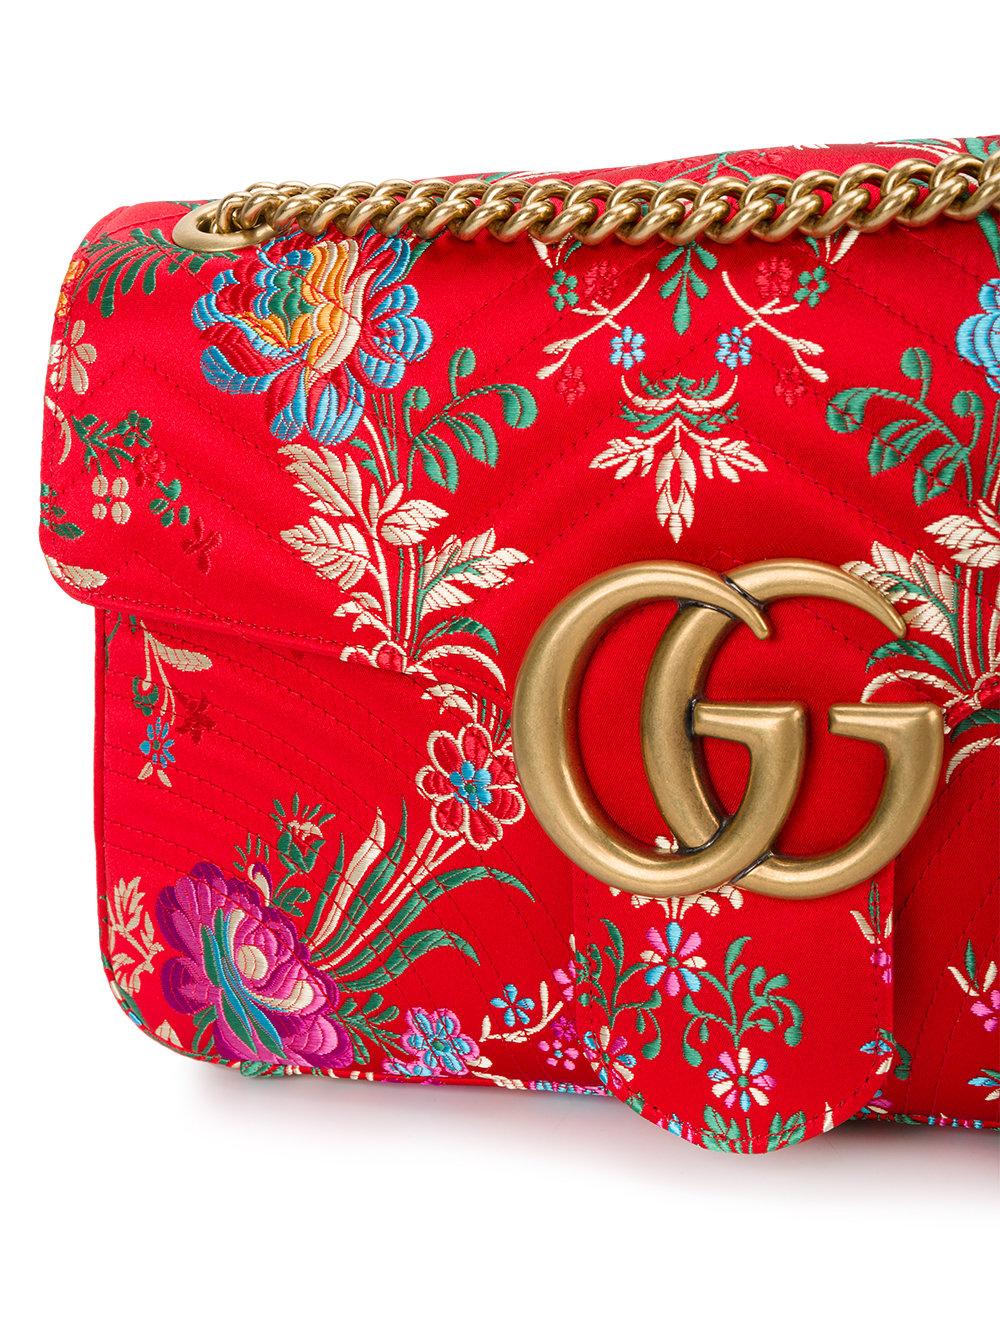 Gucci Floral Jacquard Gg Marmont Shoulder Bag in Red | Lyst